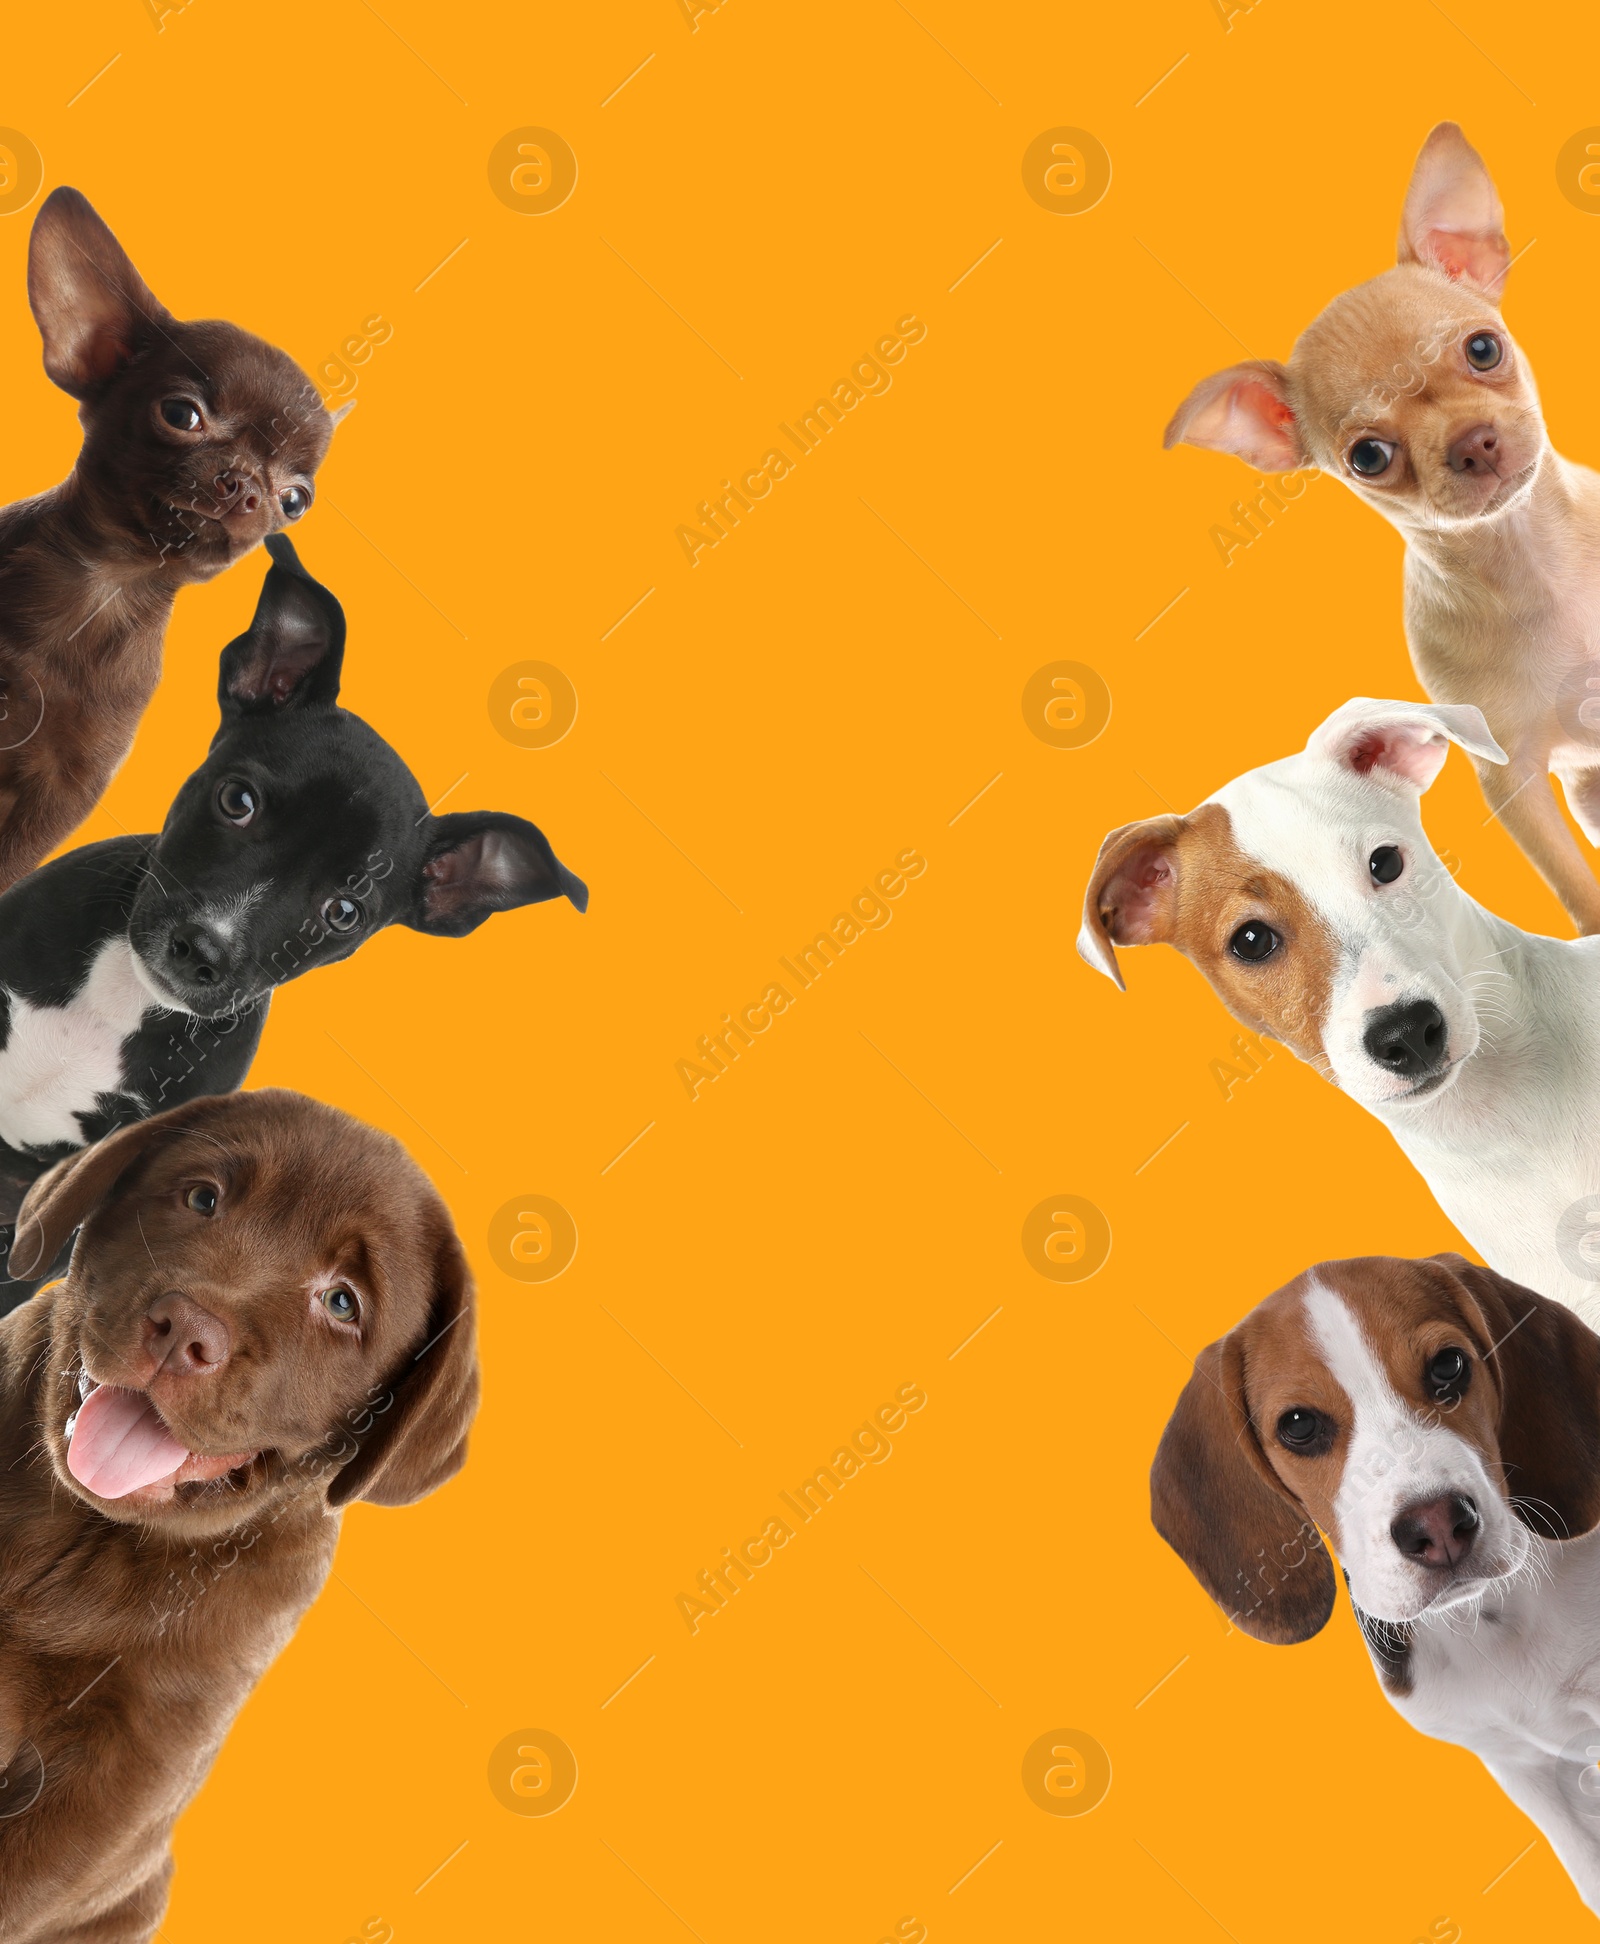 Image of Cute funny cats and dogs on orange background. Space for text